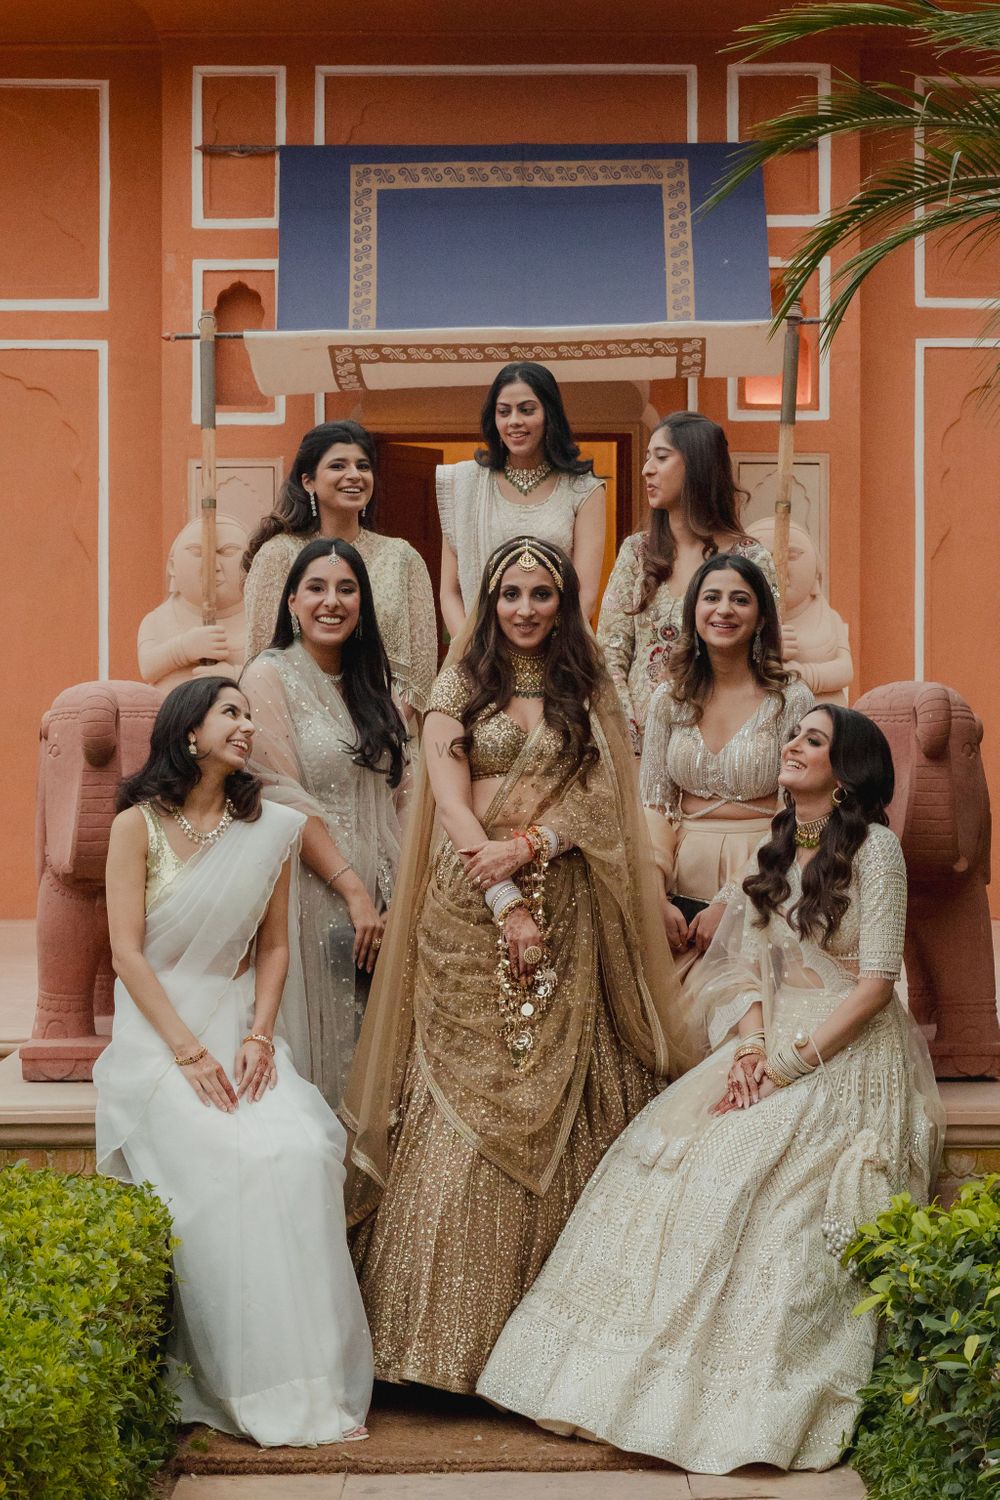 Photo of Lovely bridesmaid and bride capture with all bridesmaids co-ordinated in white